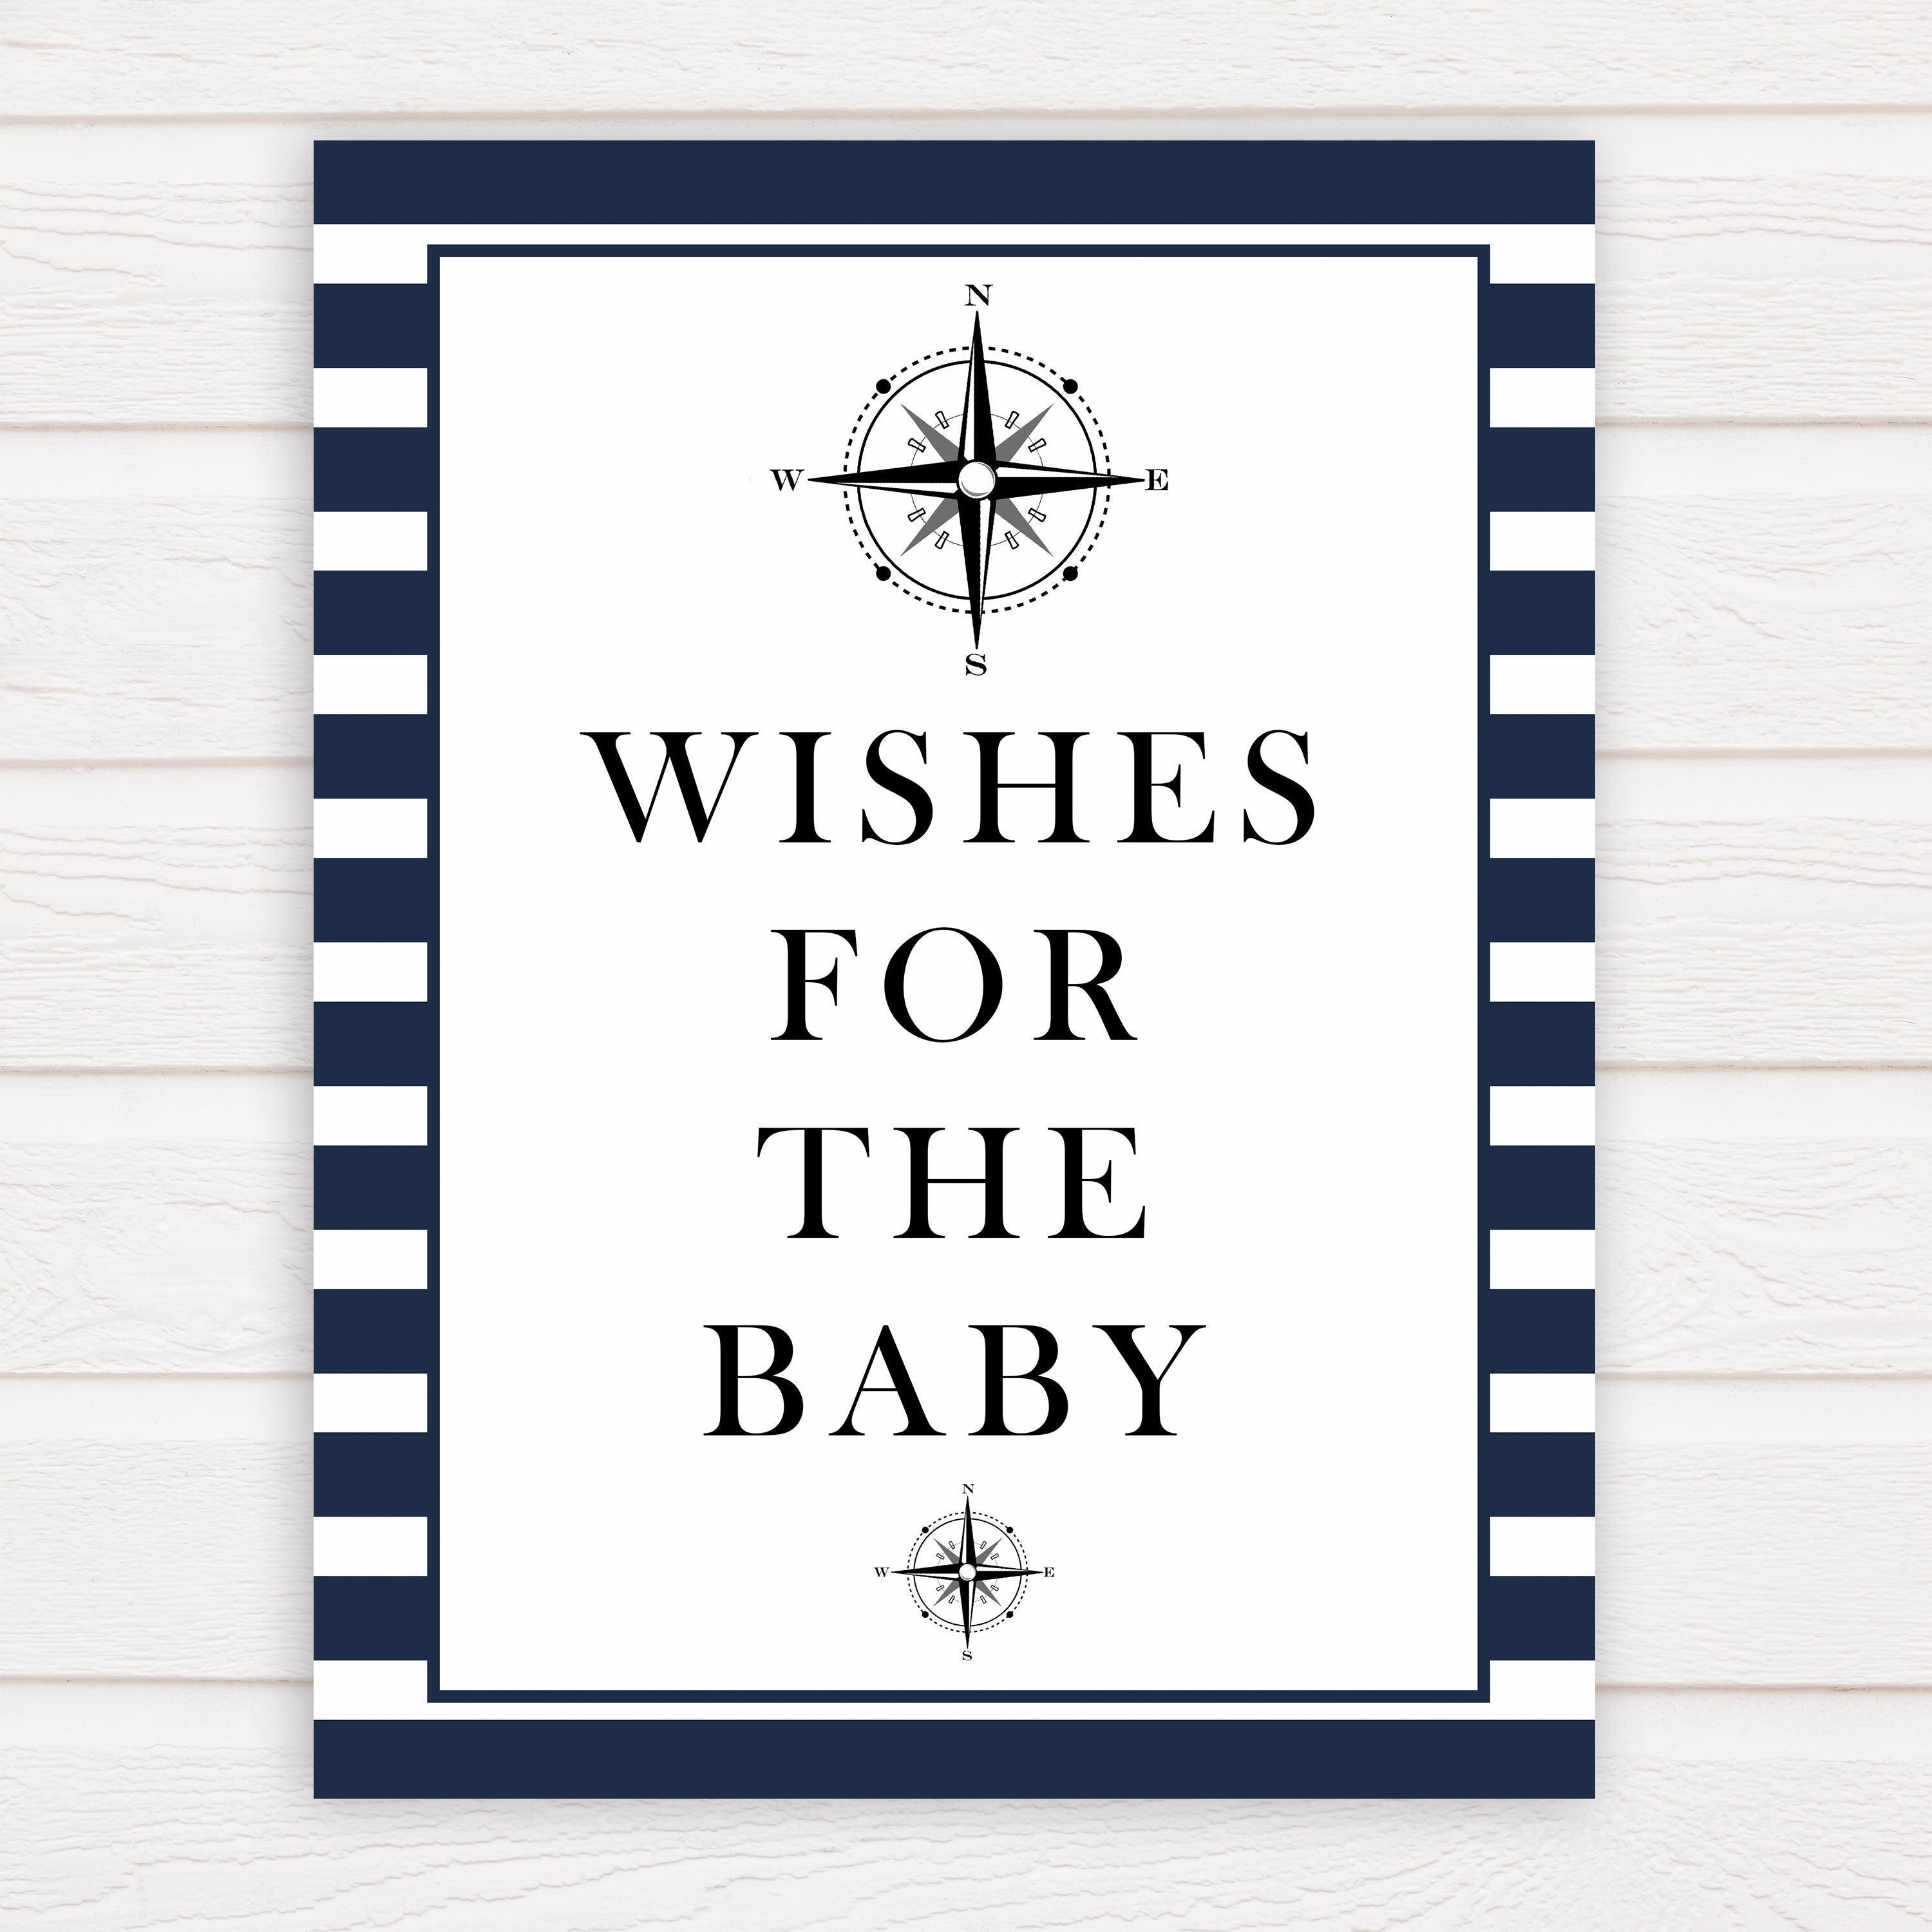 Nautical baby shower games, wishes for the baby baby shower games, printable baby shower games, baby shower games, fun baby games, ahoy its a boy, popular baby shower games, sailor baby games, boat baby games